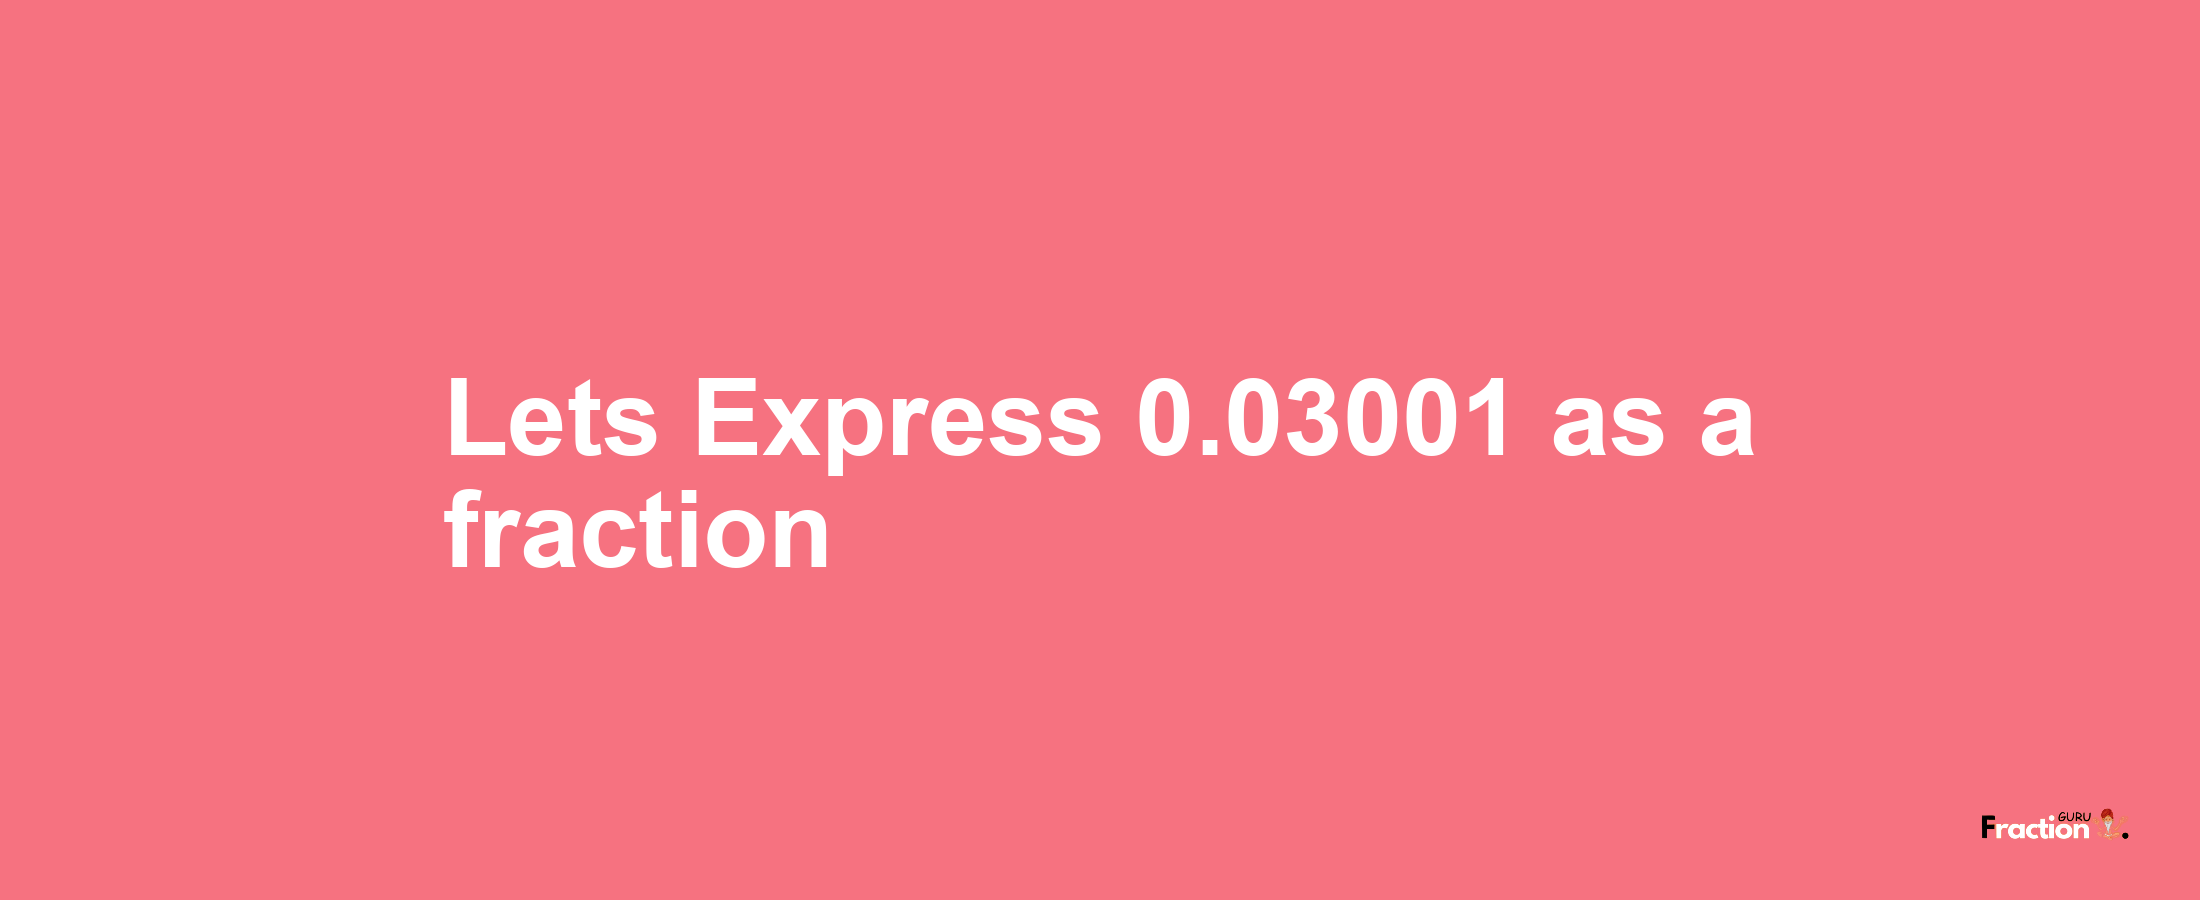 Lets Express 0.03001 as afraction